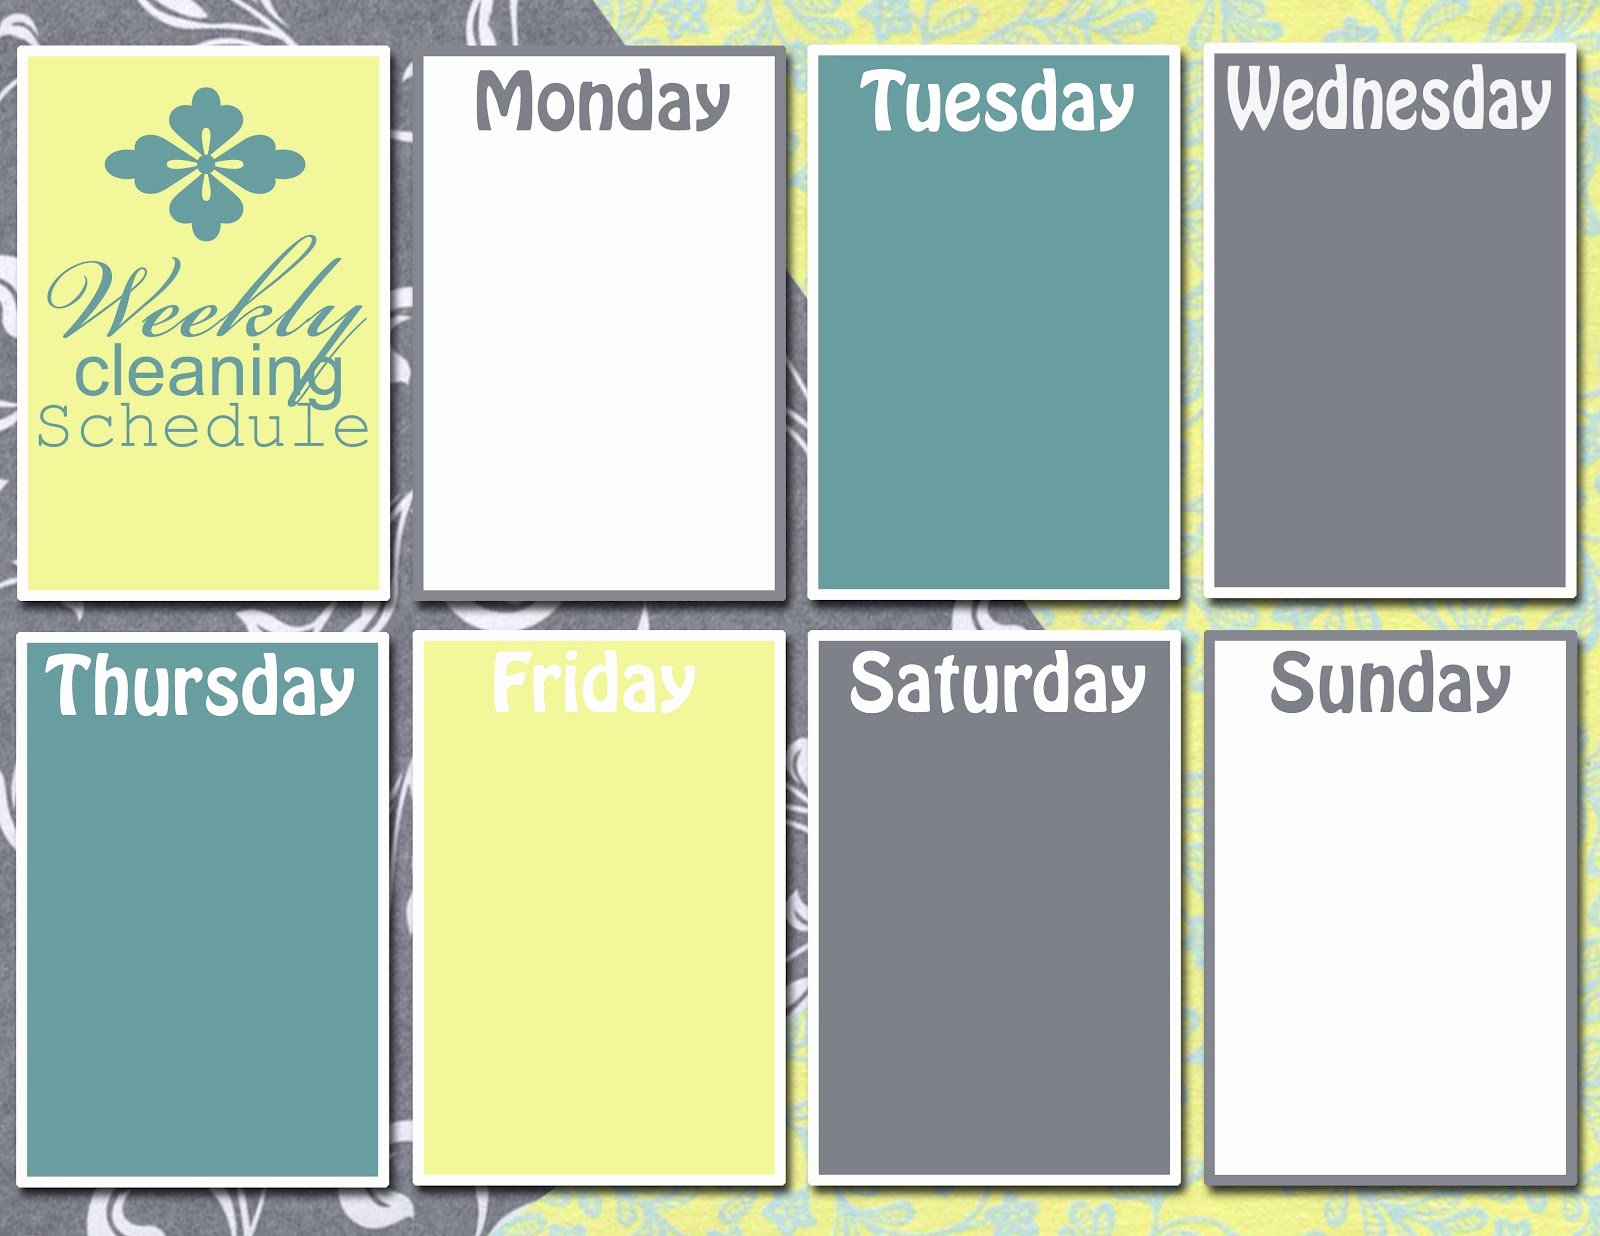 Monday Through Sunday Schedule Template Beautiful Graphic Monday Weekly Cleaning Schedule